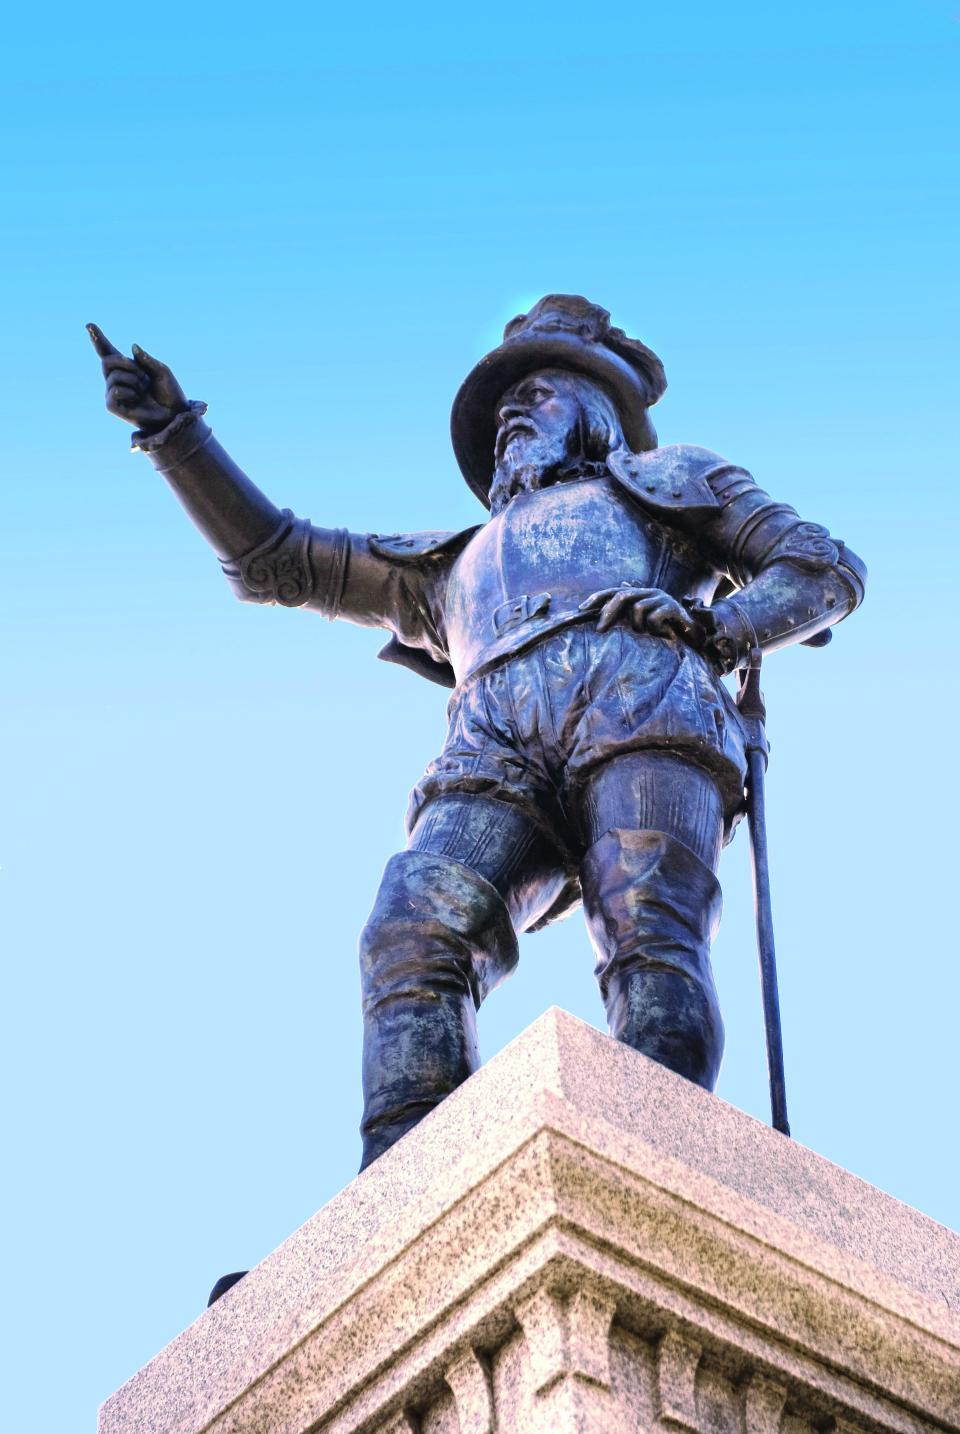 Ponce de Leon sited La Florida at 30 degrees 8 minutes, just of current day St. Augustine Coast on April 2, 1513.